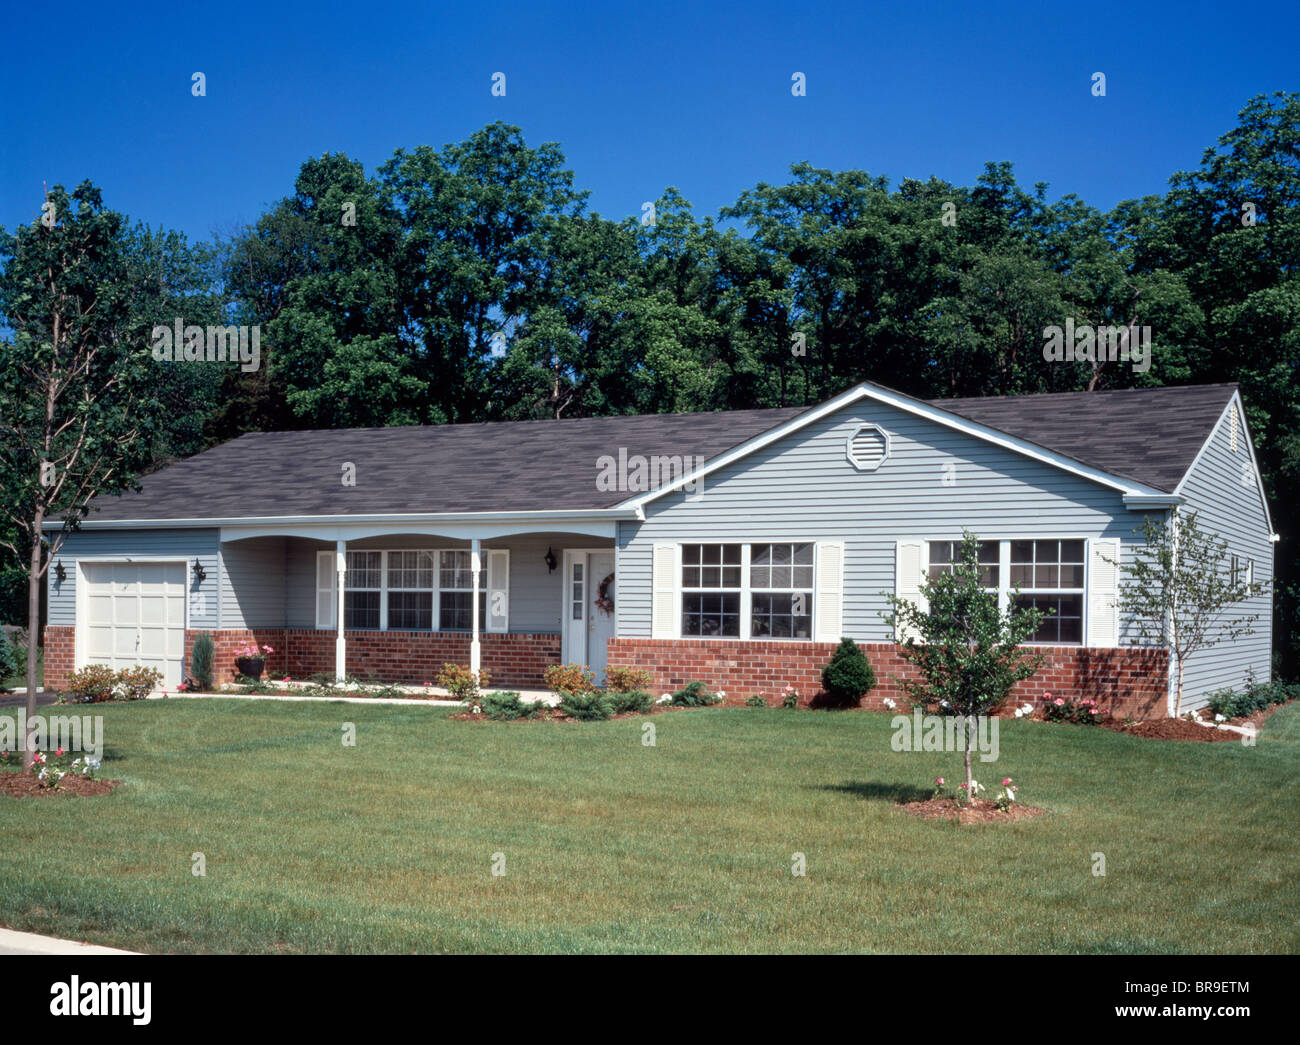 1960s 1970s SINGLE STORY RANCH STYLE HOME WITH LAWN Stock Photo